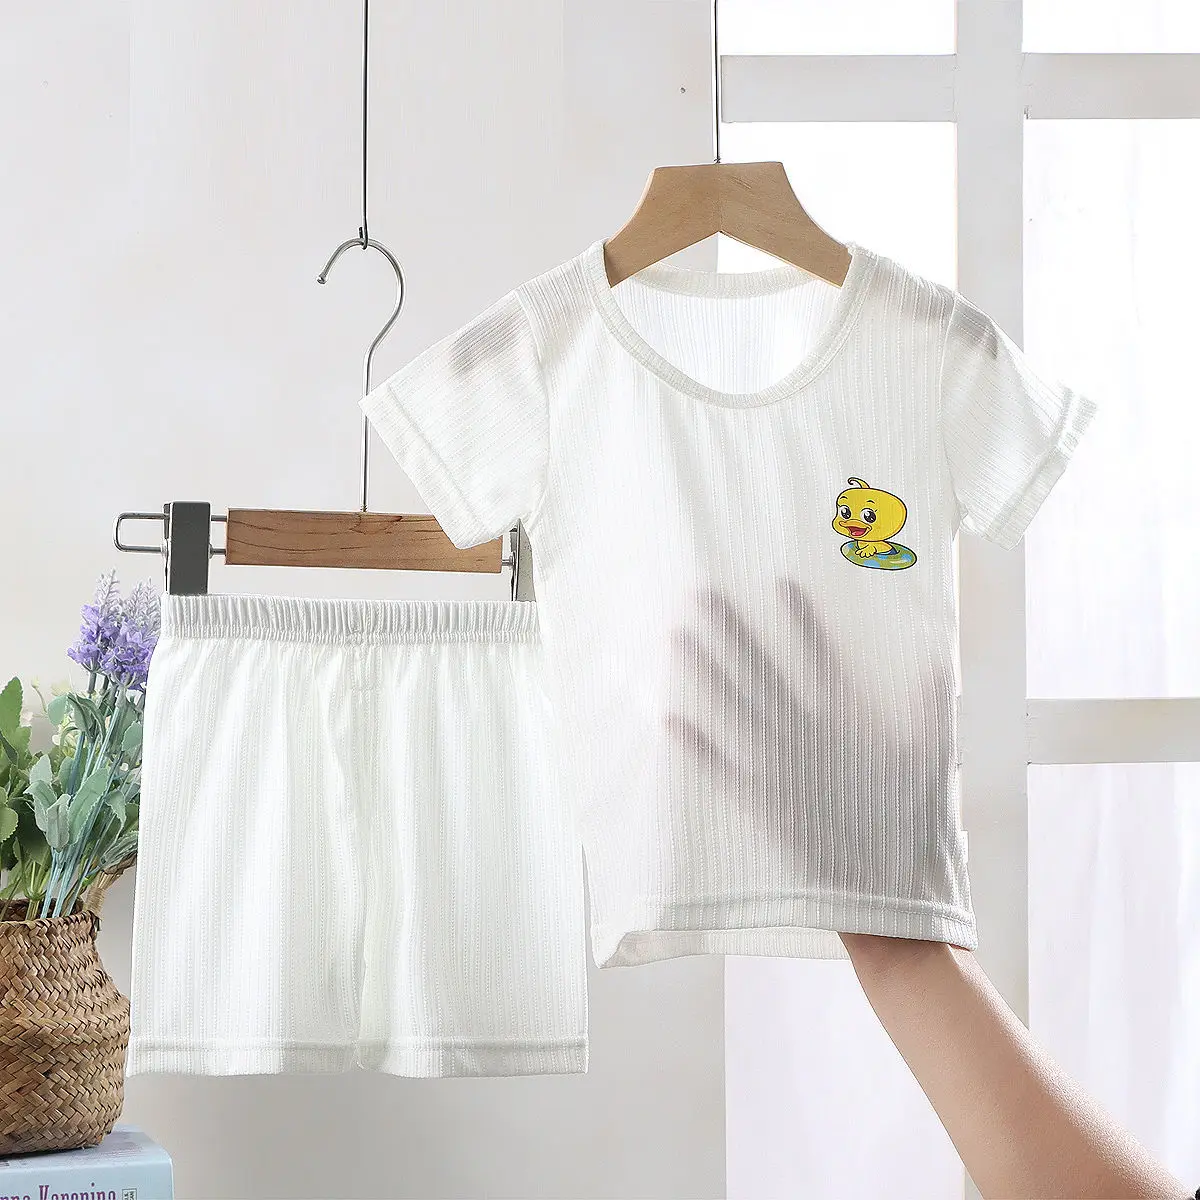 women's clothing sets	 Children's Short-sleeved Suit 2 Pieces 2022 Summe T-shirt 0-6 Years Old Boy\Girl Short-sleeved Shorts Baby Breathable Clothing discovery clothing sets	 Clothing Sets